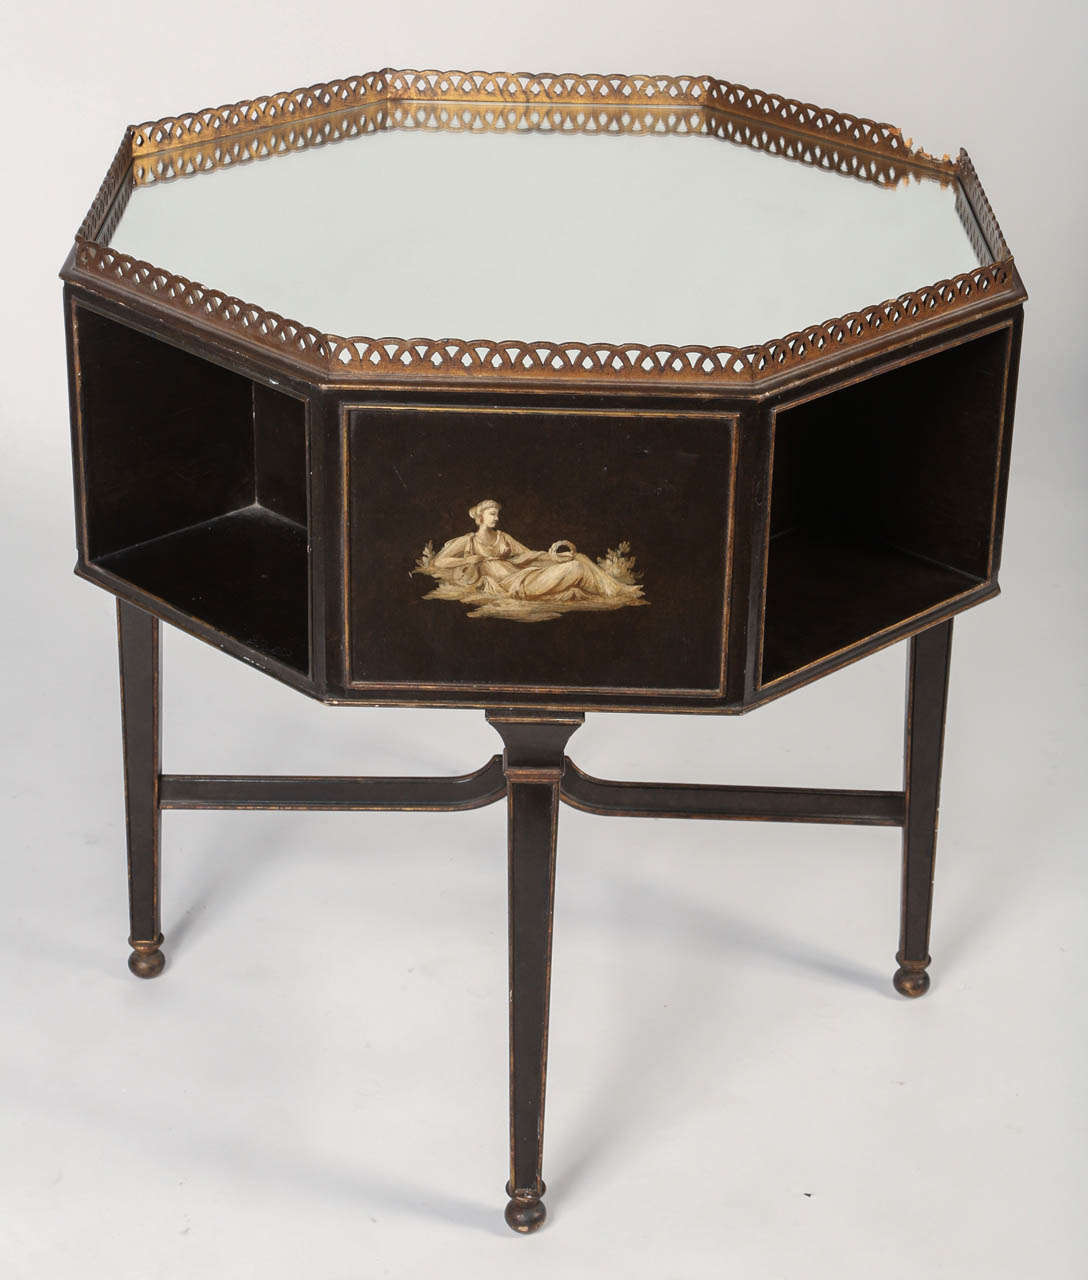 Delicate paintings adorn this mirror topped octagon-shaped table made from ebonized wood. Tapered legs with diminutive balled feet are reinforced by a finial topped x-stretcher.  This would make an elegant yet functional end table next to a sofa or